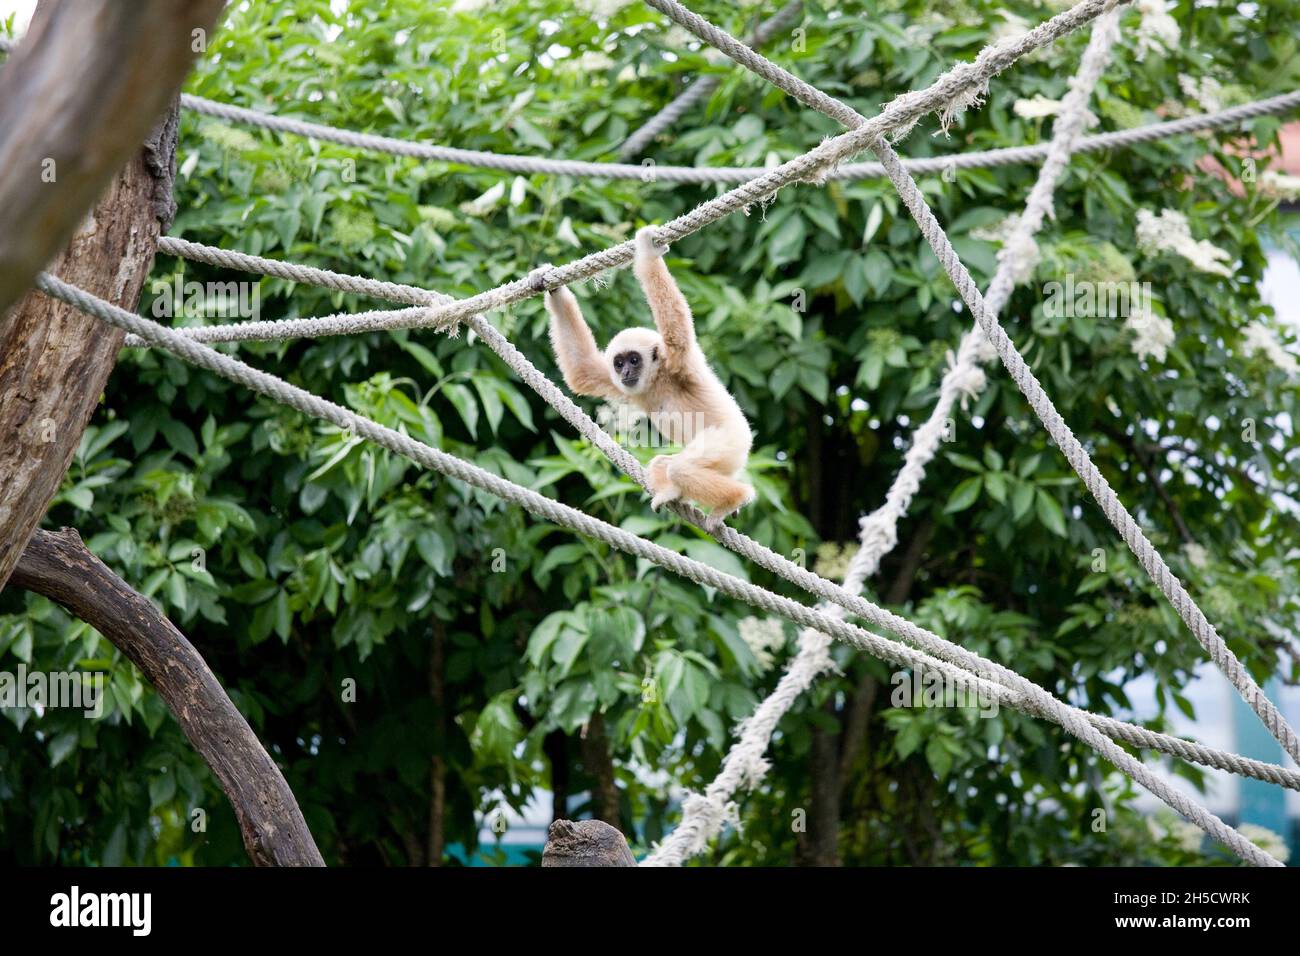 common gibbon, white-handed gibbon (Hylobates lar), make it's way hand over hand along a rope in outdoor enclosure Stock Photo